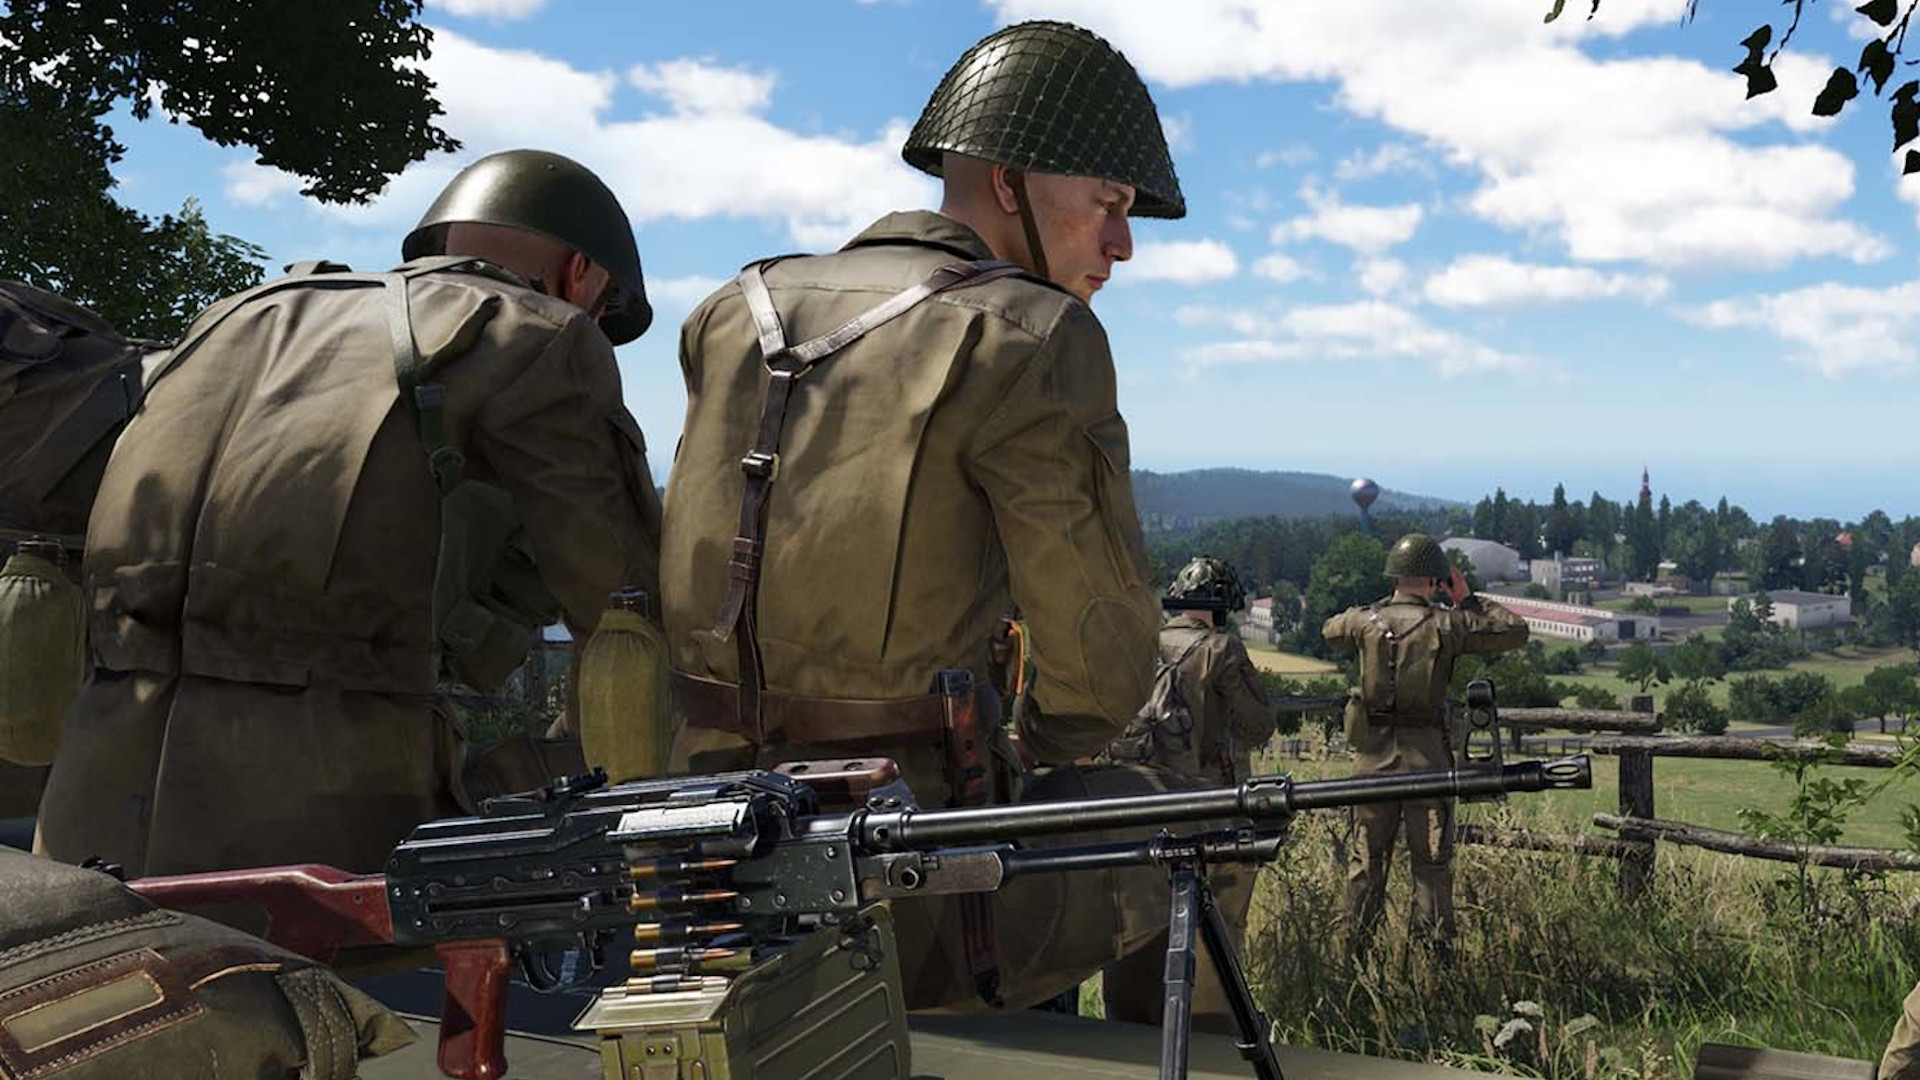 Arma Reforger mods are cross-compatible between PC and Xbox